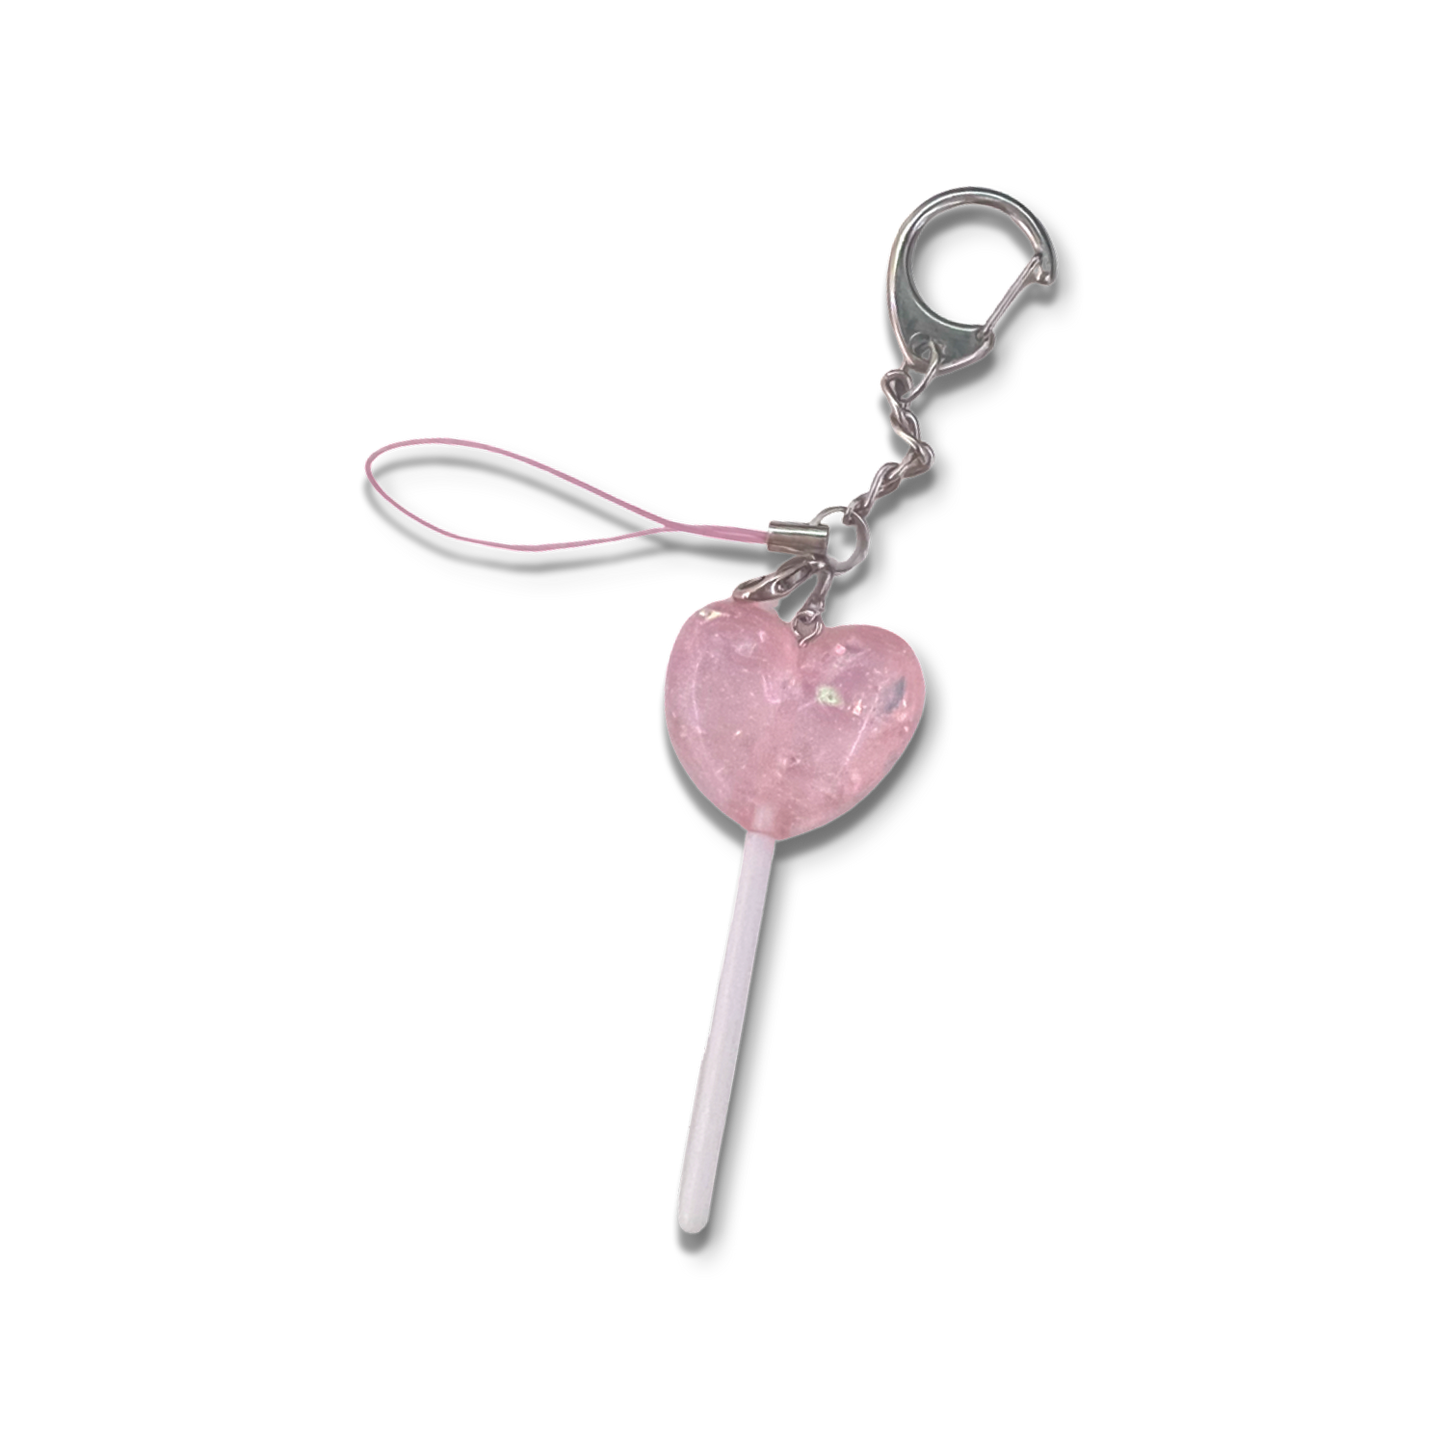 Big pink sparkly lollipop with keychain and basic pink phone strap.